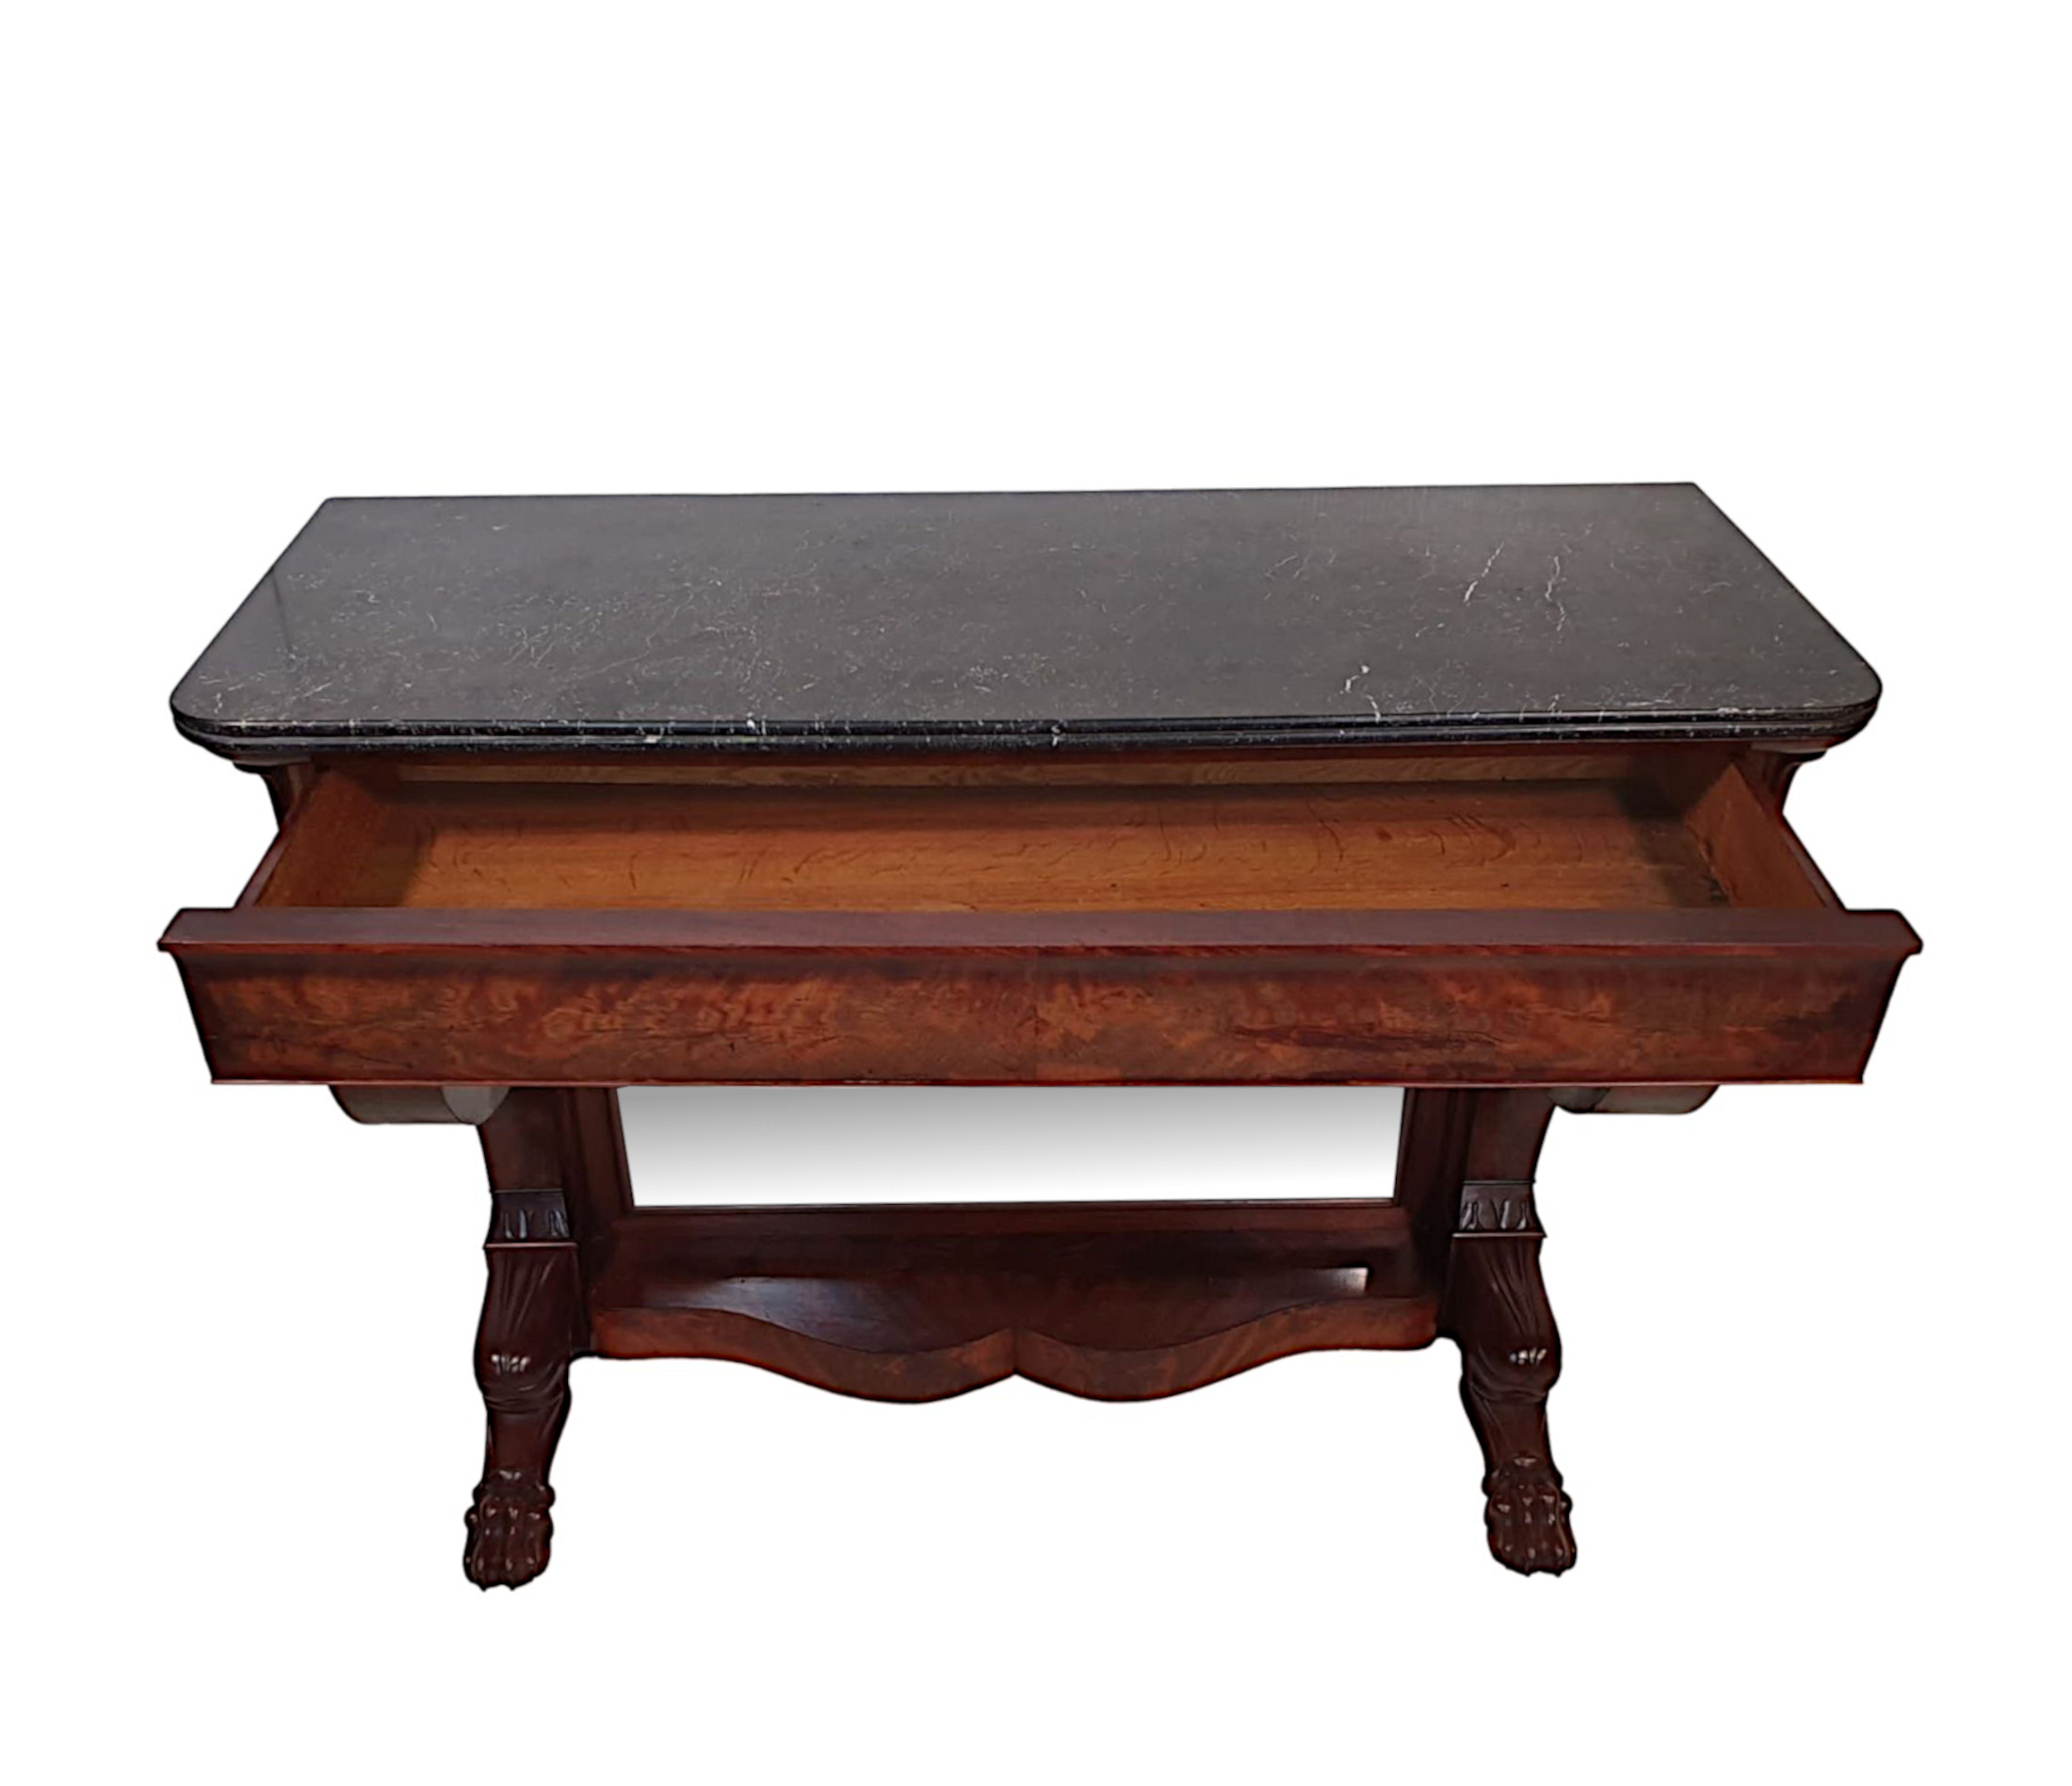 A Superb 19th Century Marble Top Console Table